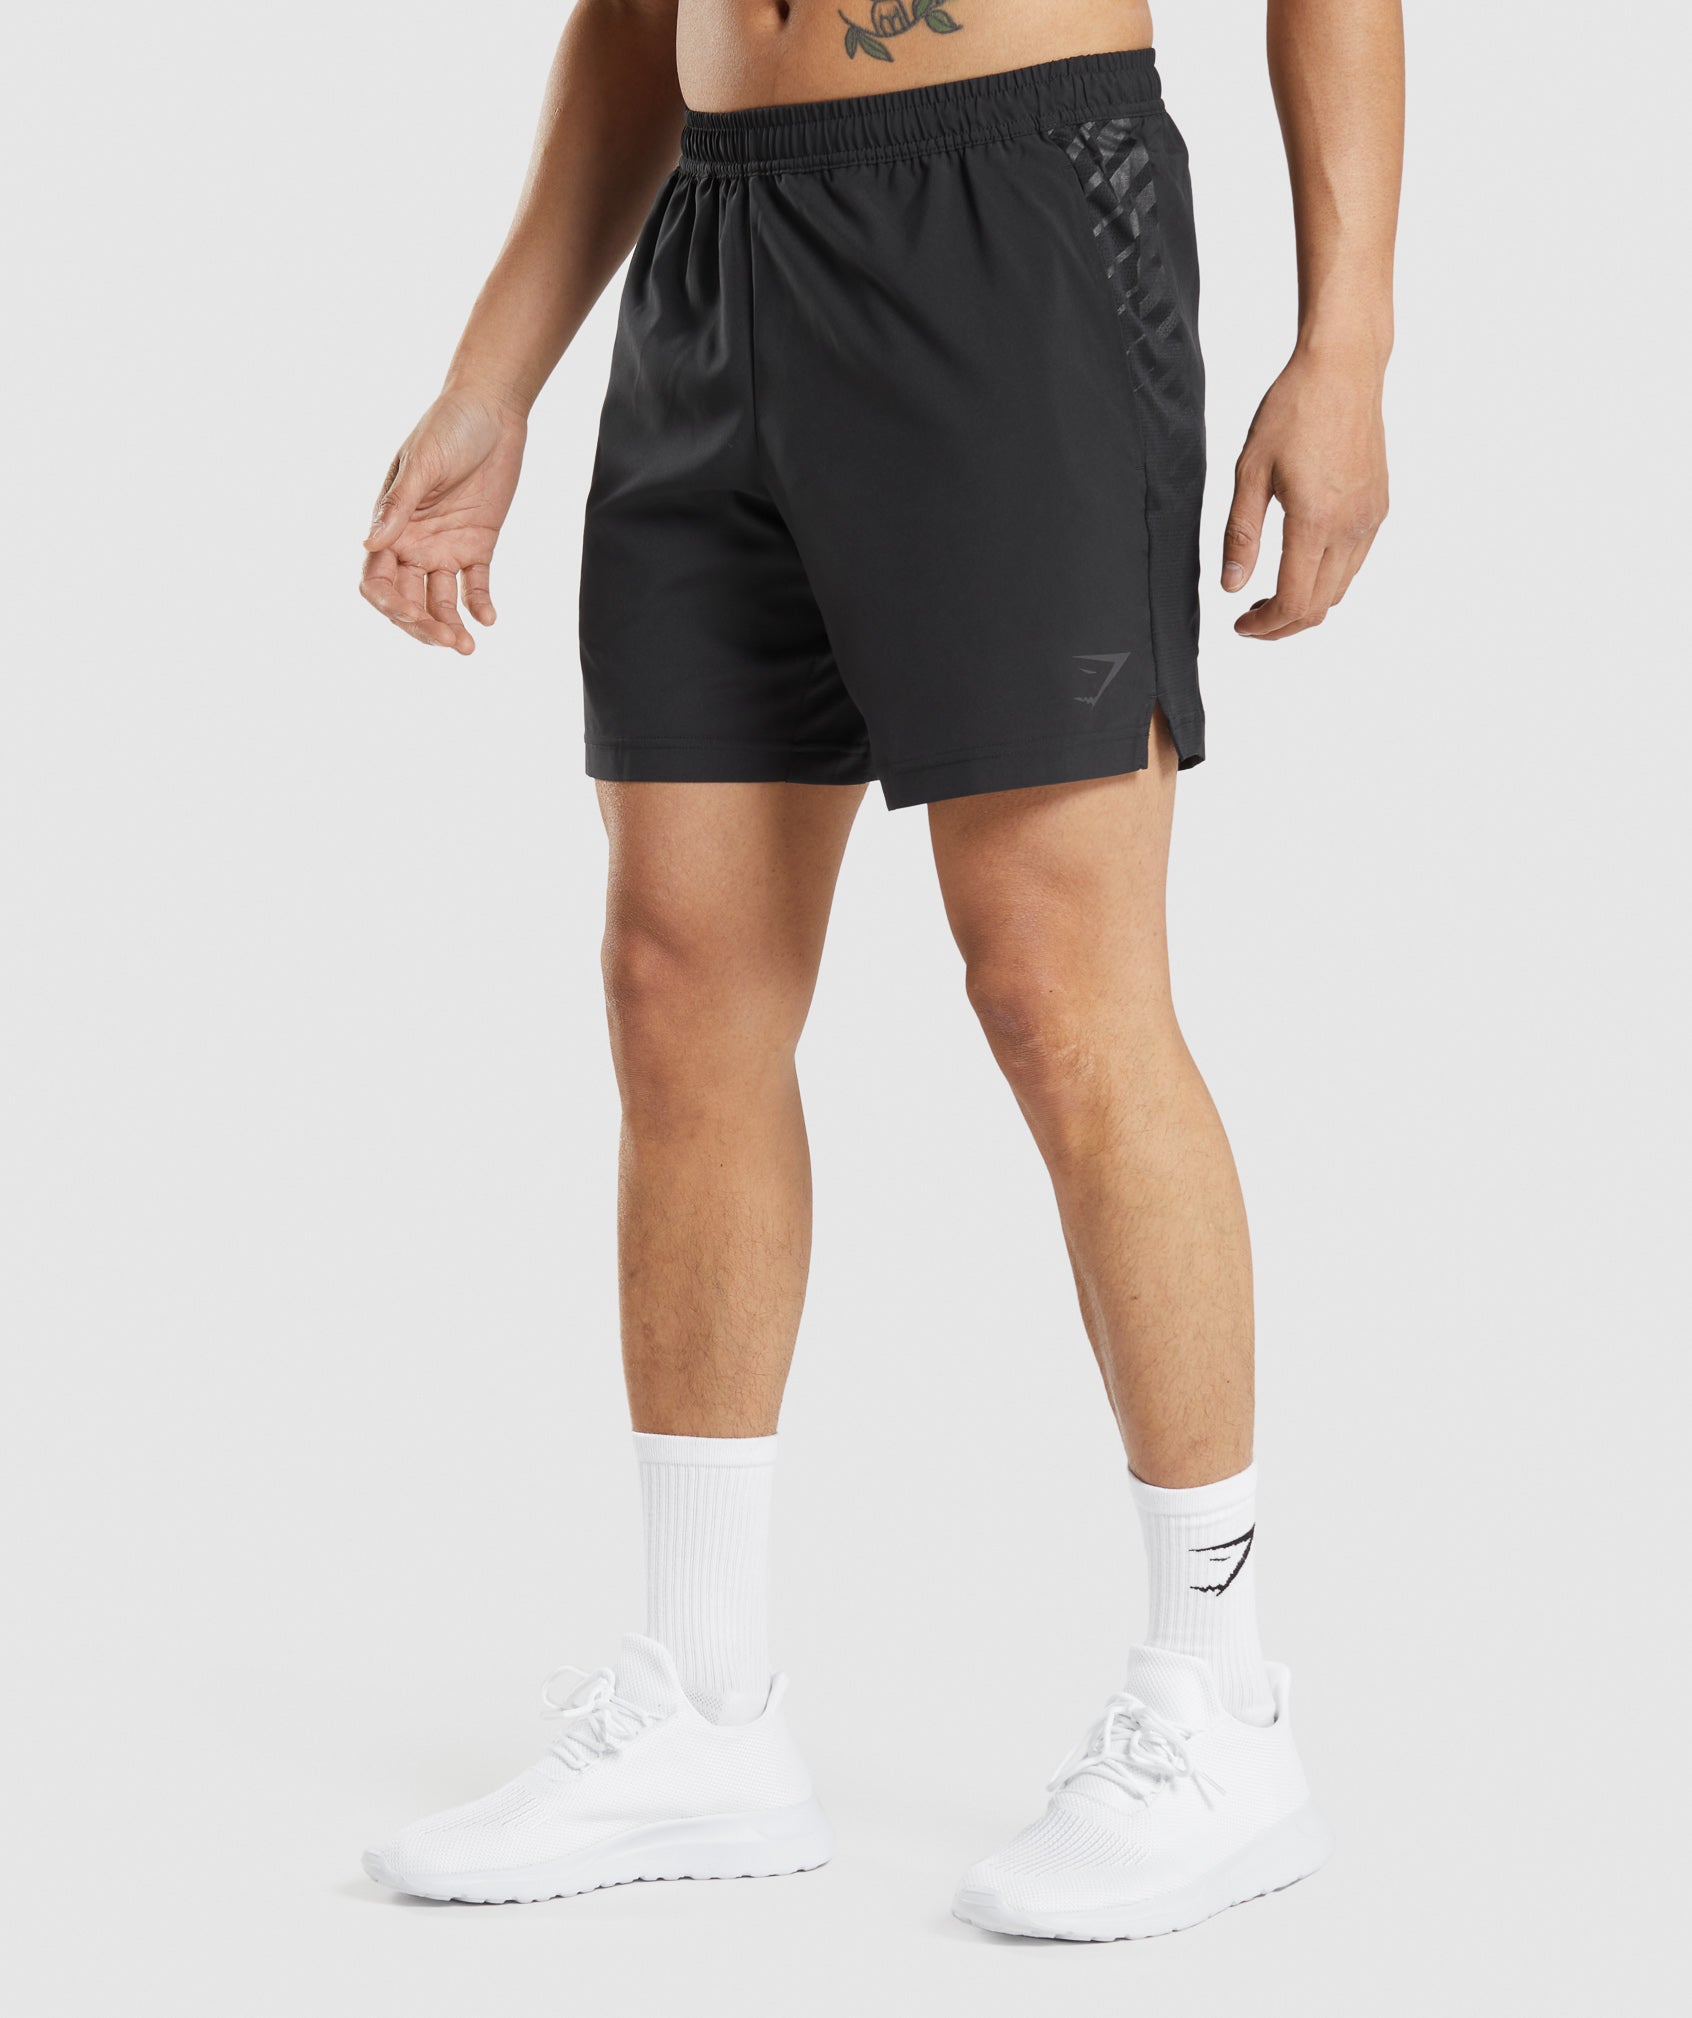 Gymshark Training Shorts Purple - $18 (35% Off Retail) - From brooke